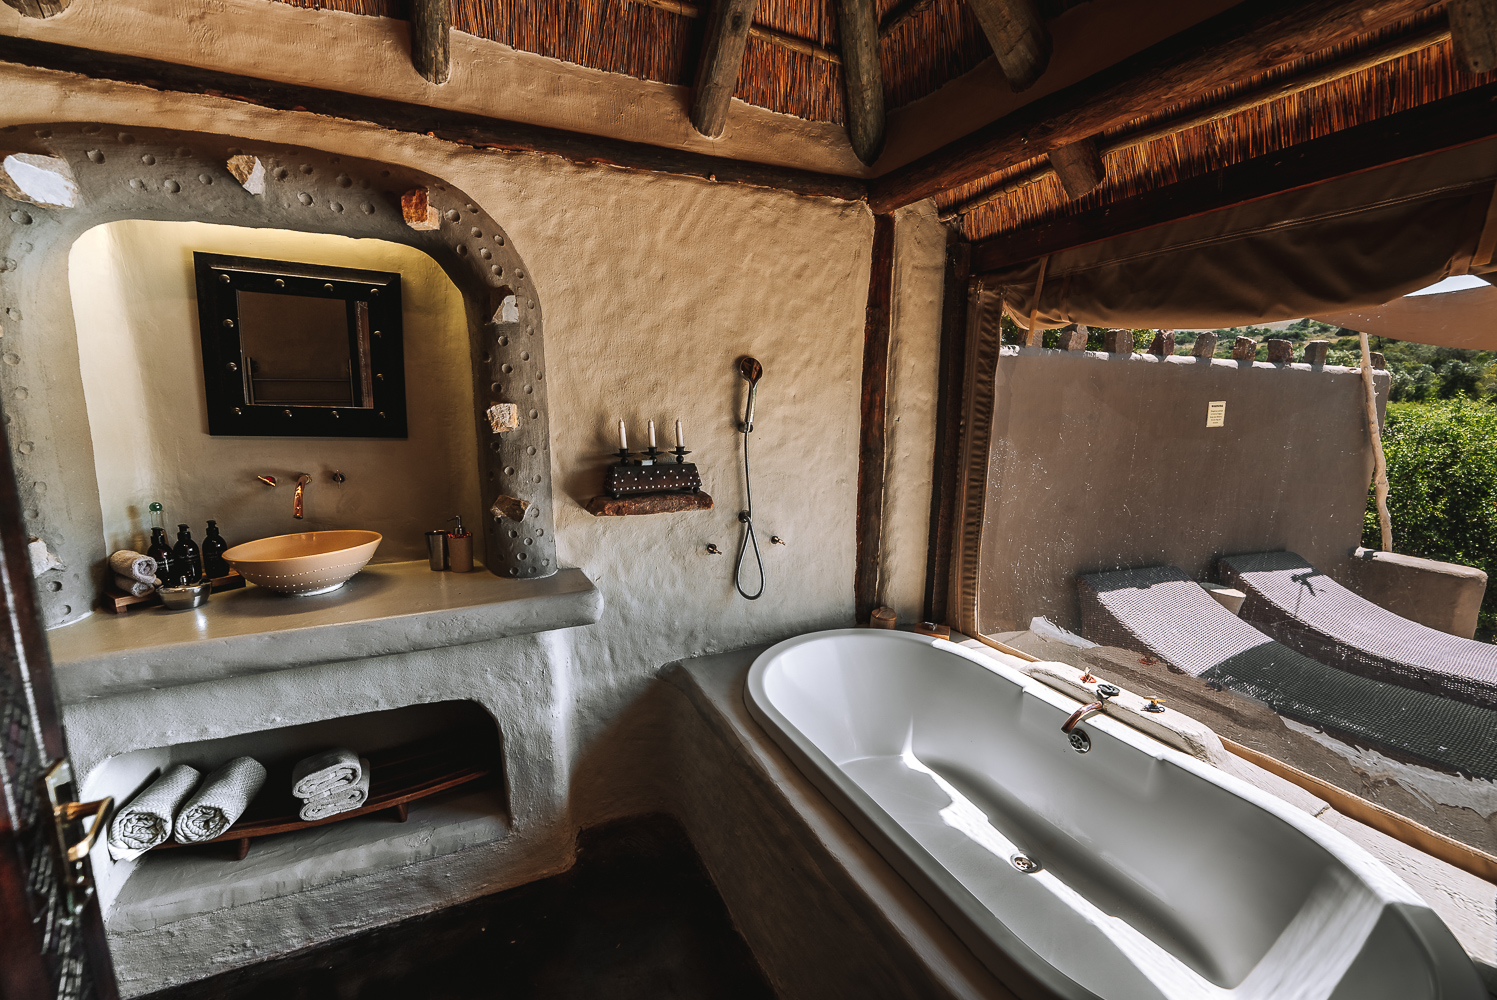 Our suite at the Amakhala Safari Lodge, safari lodges in South Africa